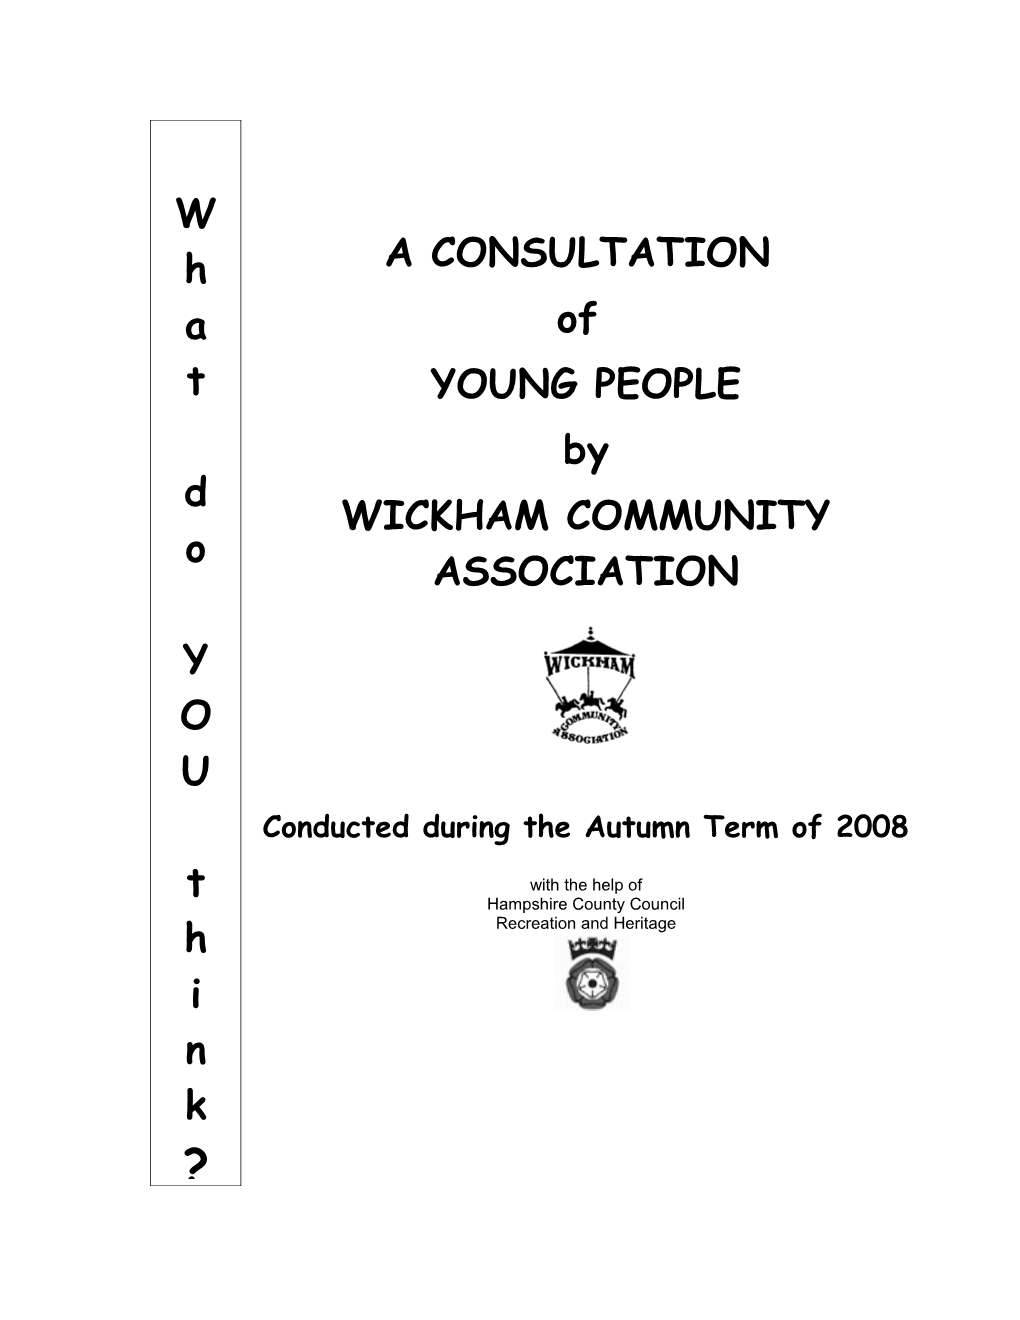 Wickham Community Association Realises the Importance of the Provision of Facilities For